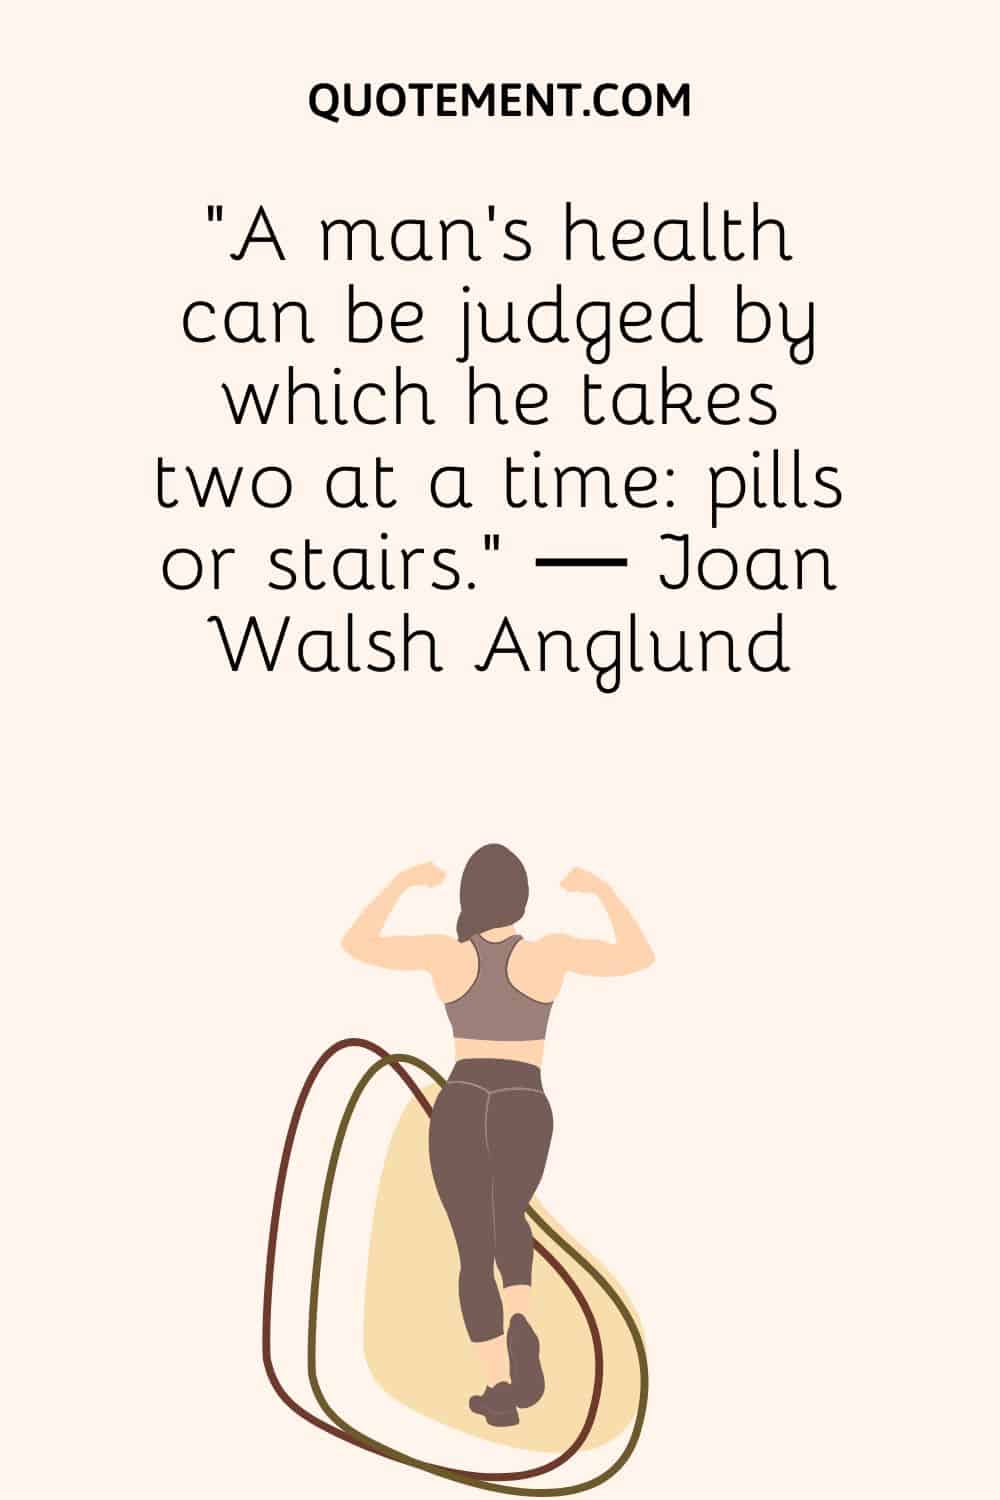 “A man’s health can be judged by which he takes two at a time pills or stairs.” ― Joan Walsh Anglund